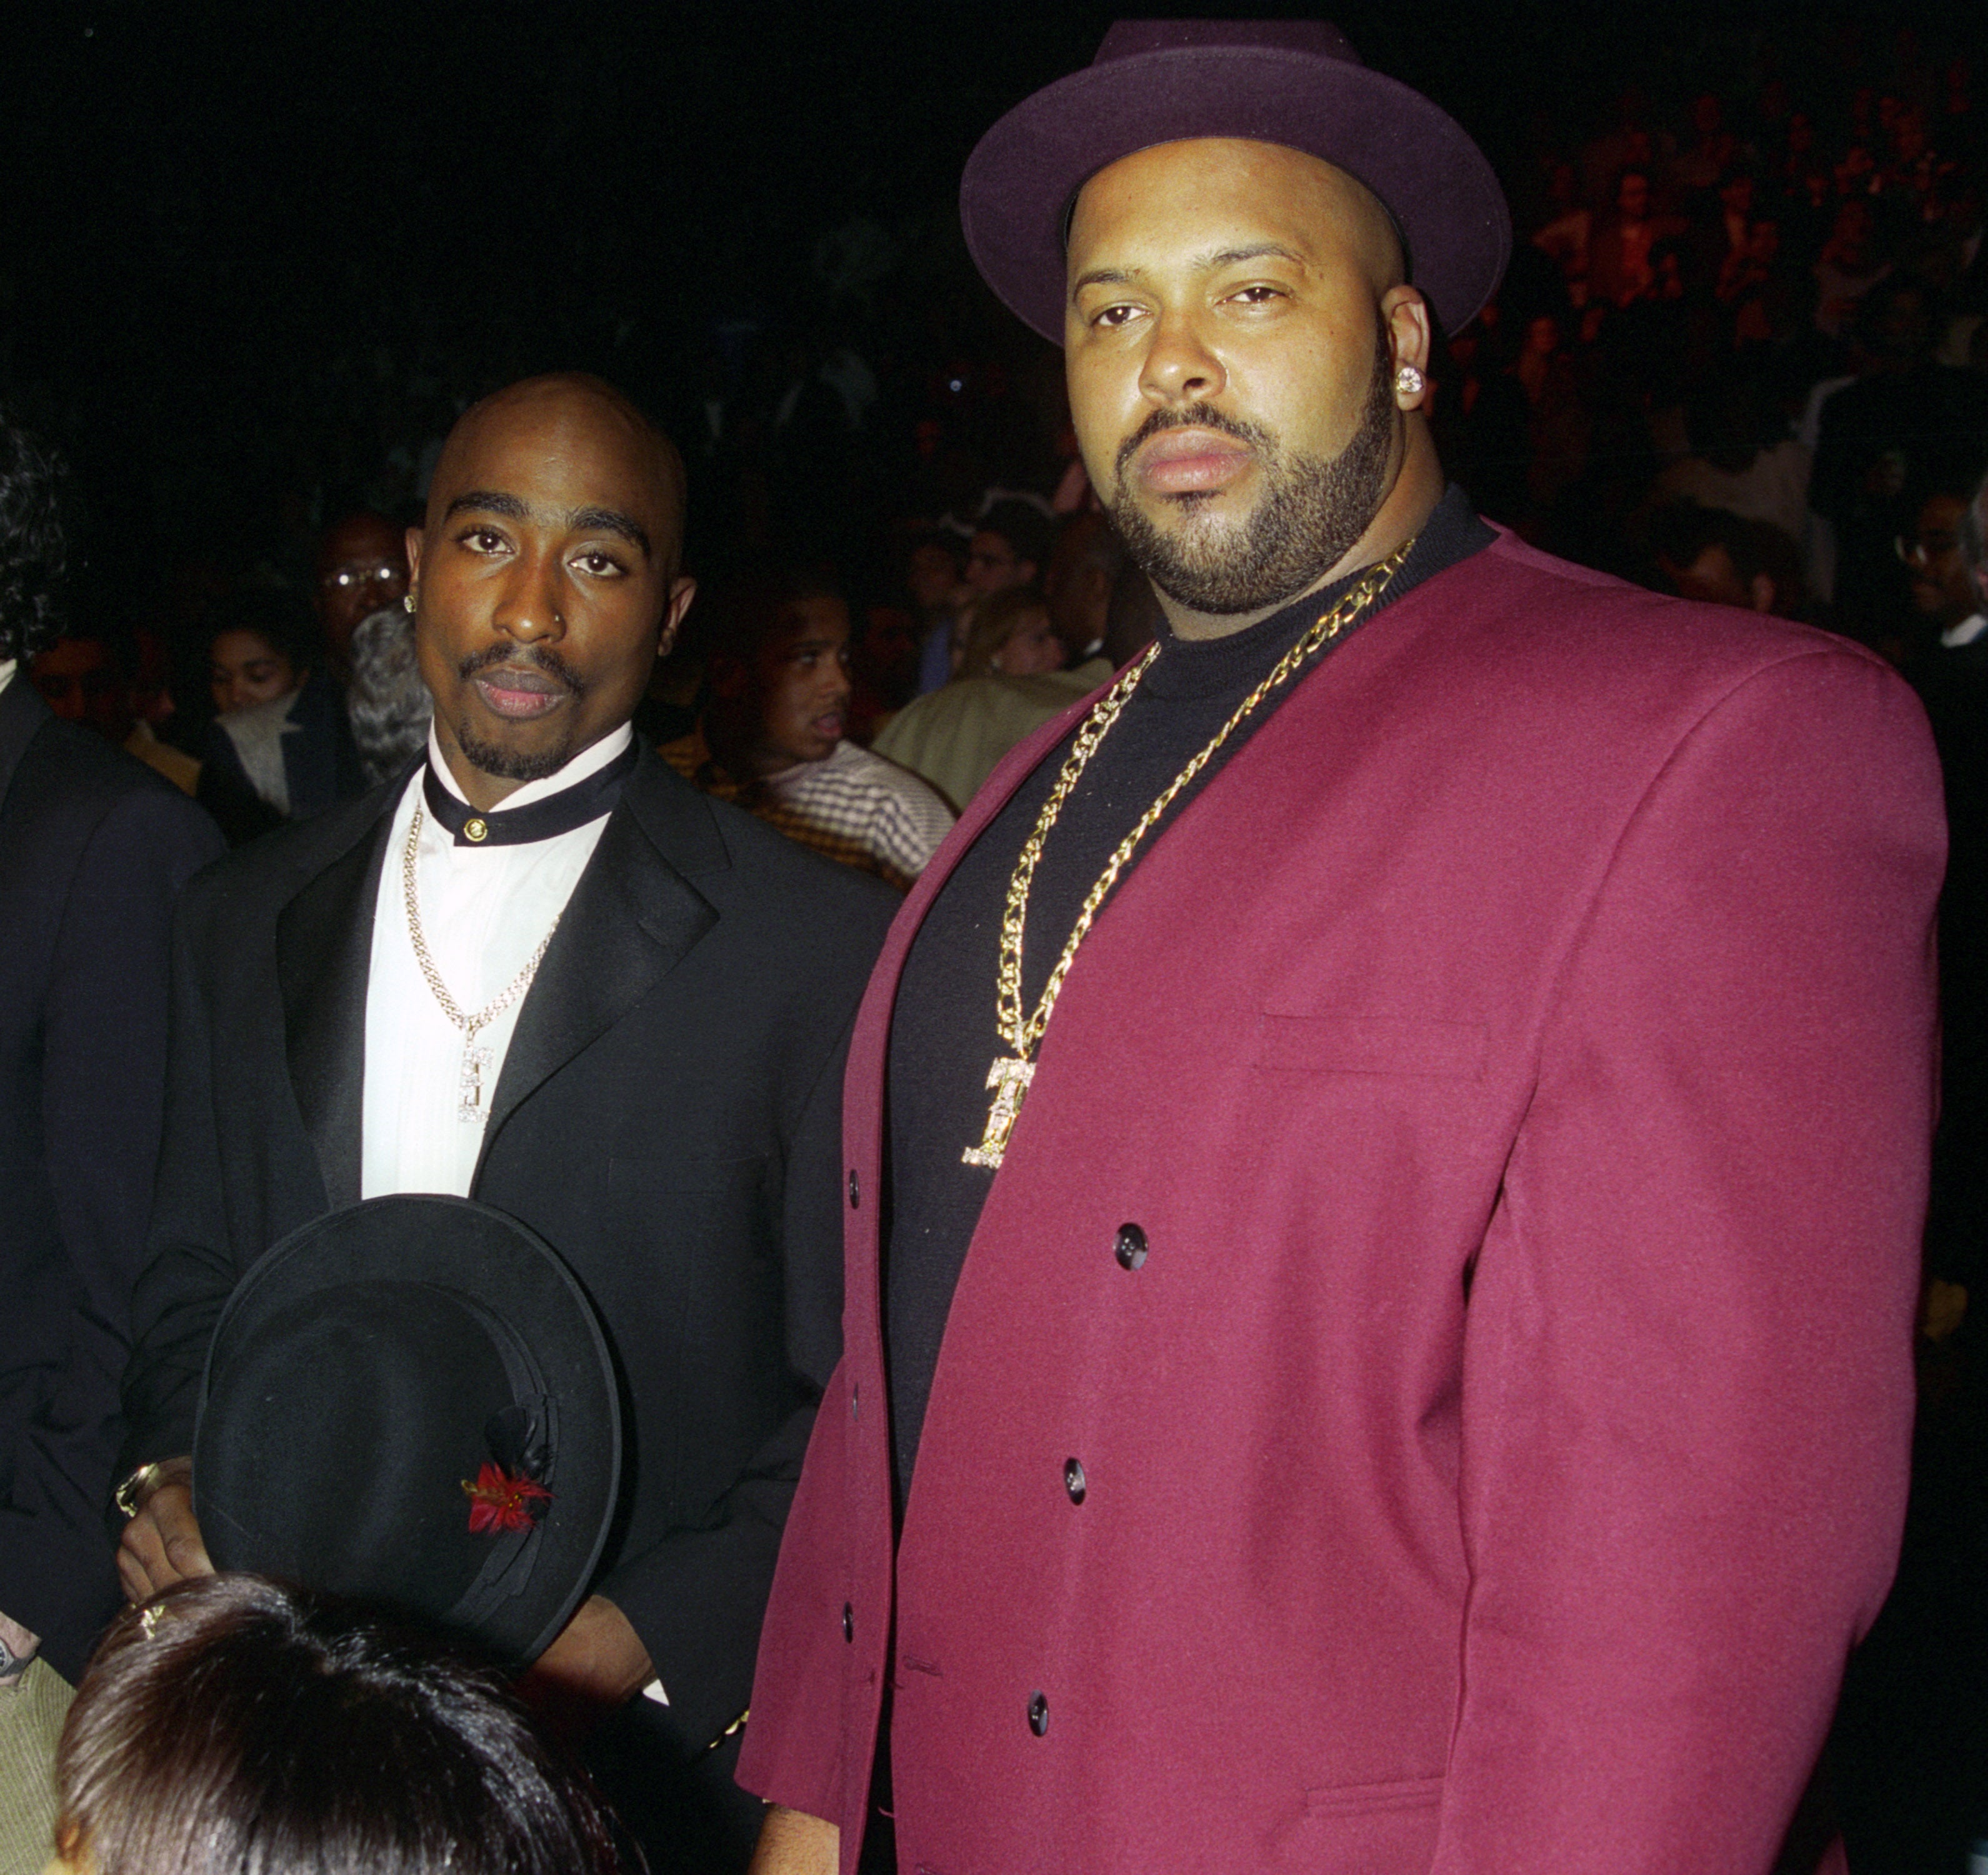 Suge Knight Adds Fuel To Conspiracy Theory That Tupac Is Still Alive
